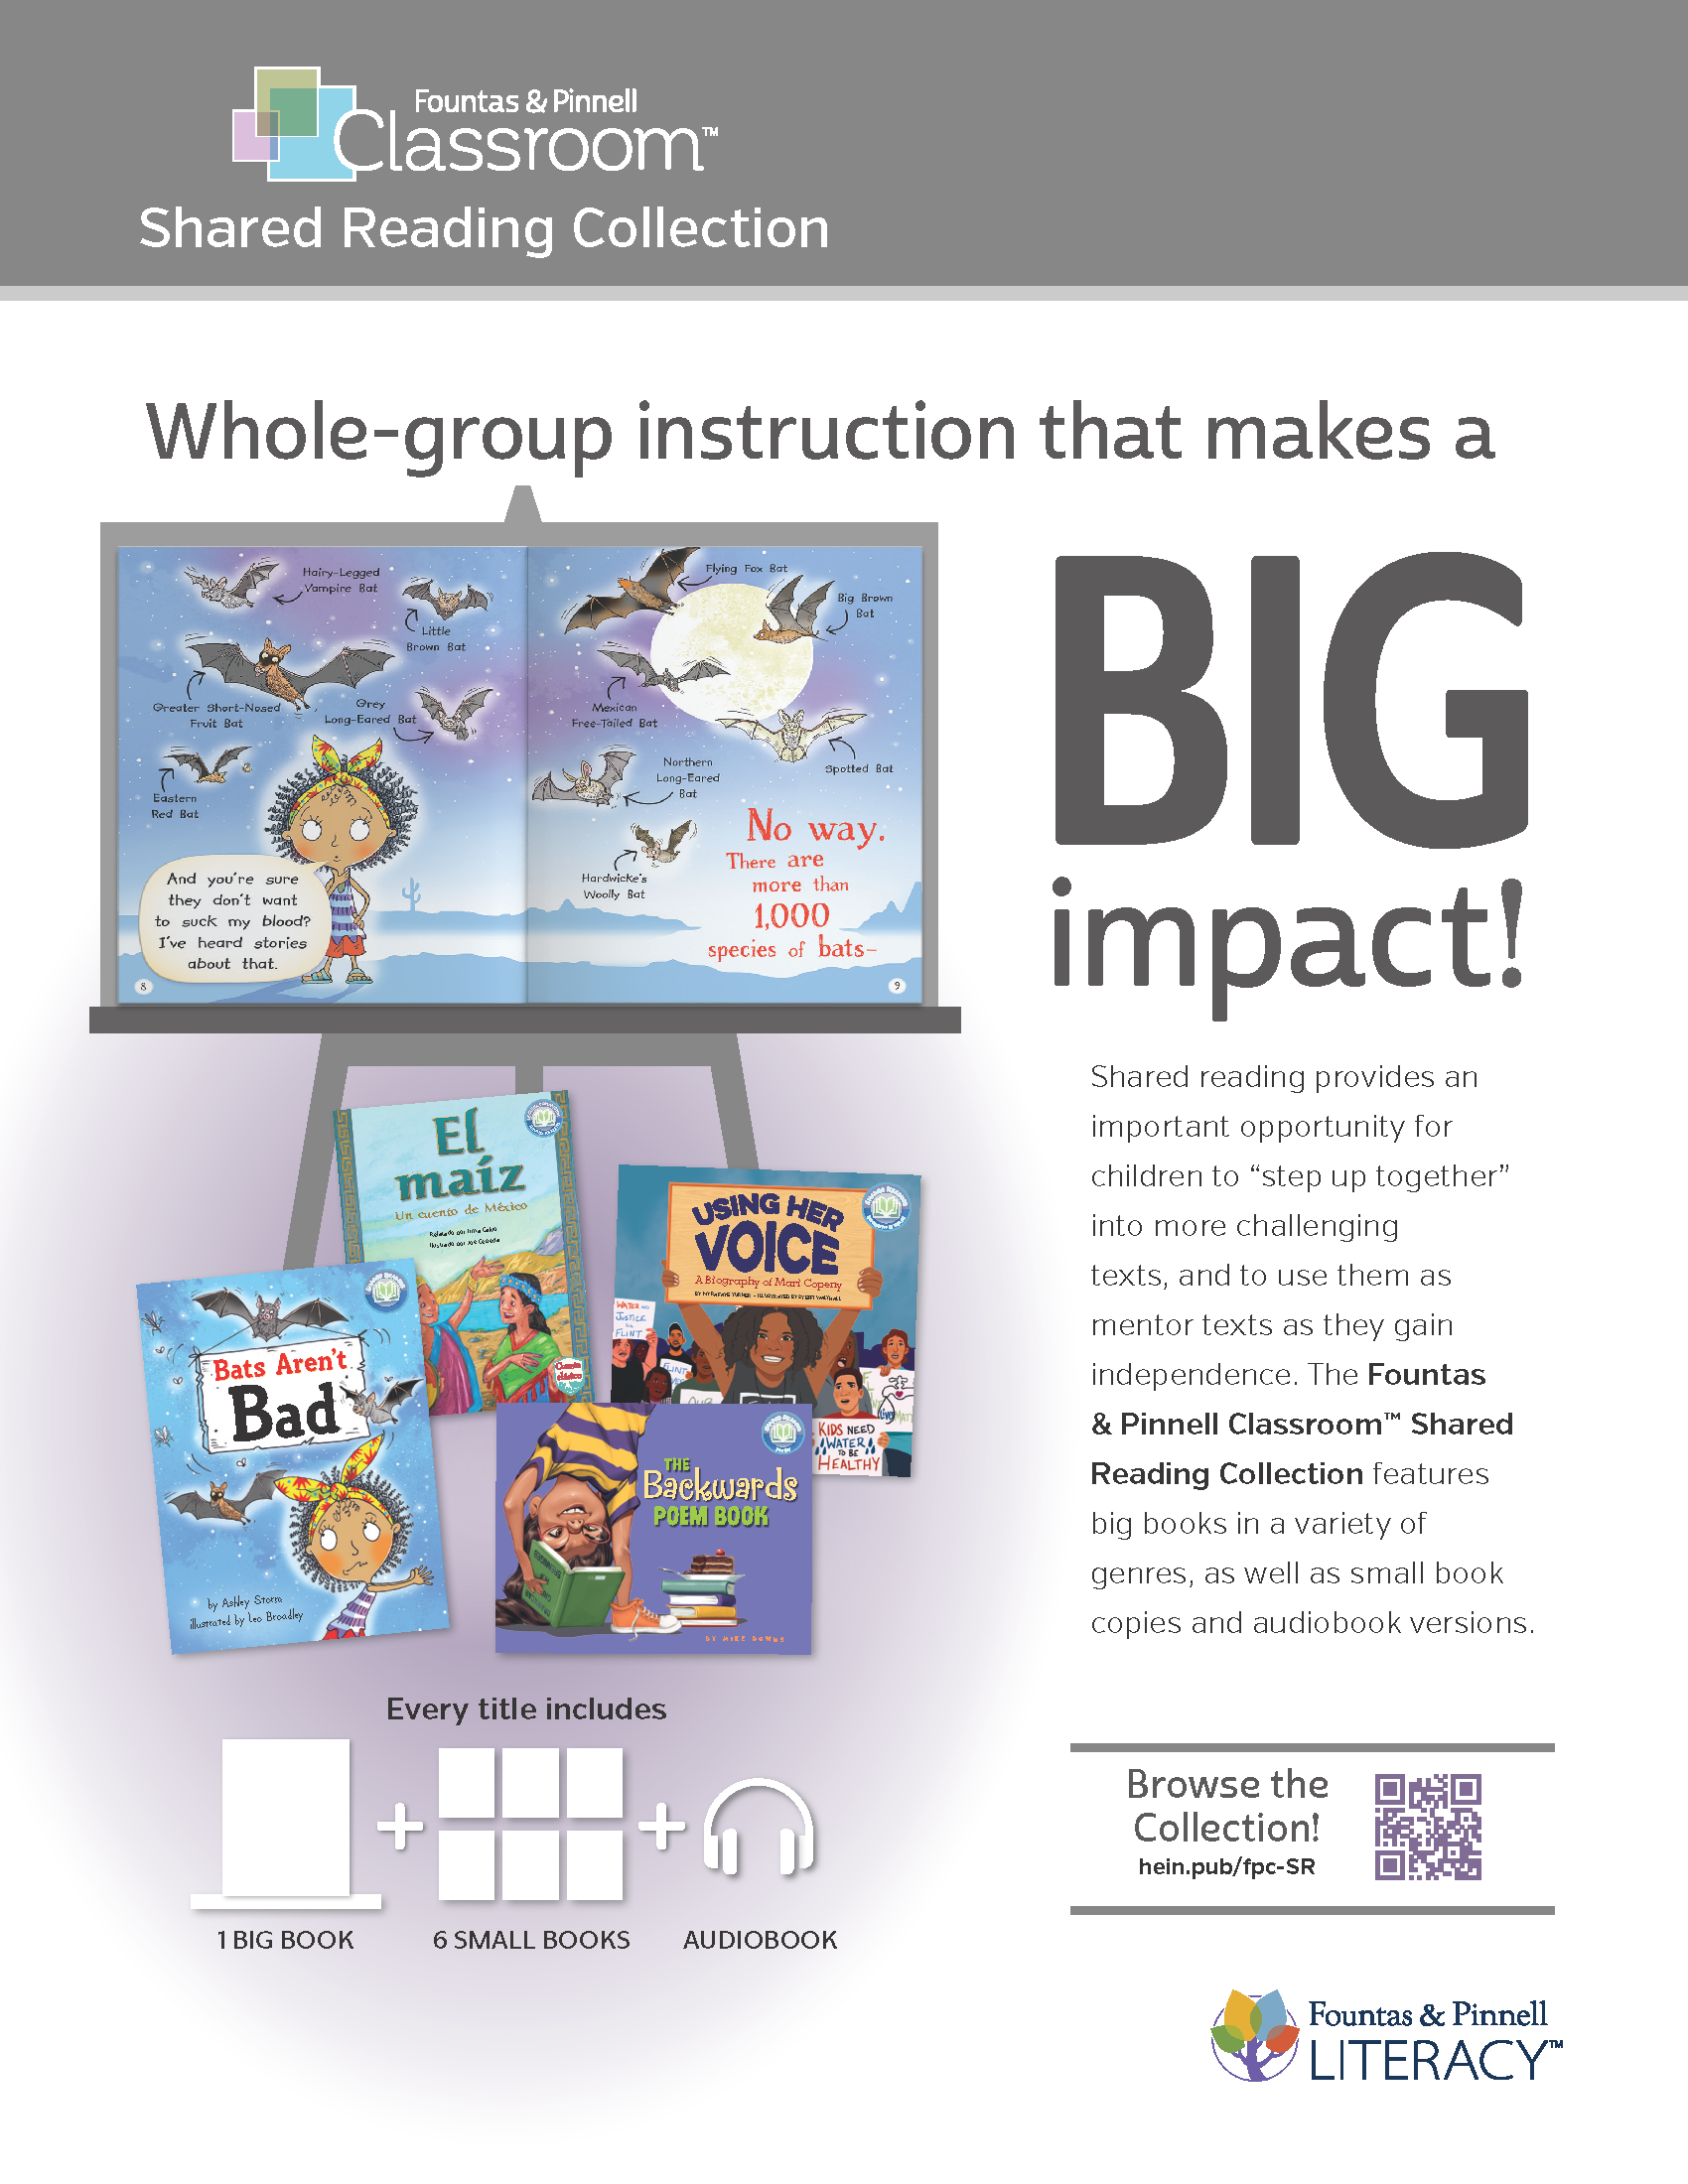 Fountas & Pinnell Classroom™ Shared Reading Makes a BIG Impact Flyer